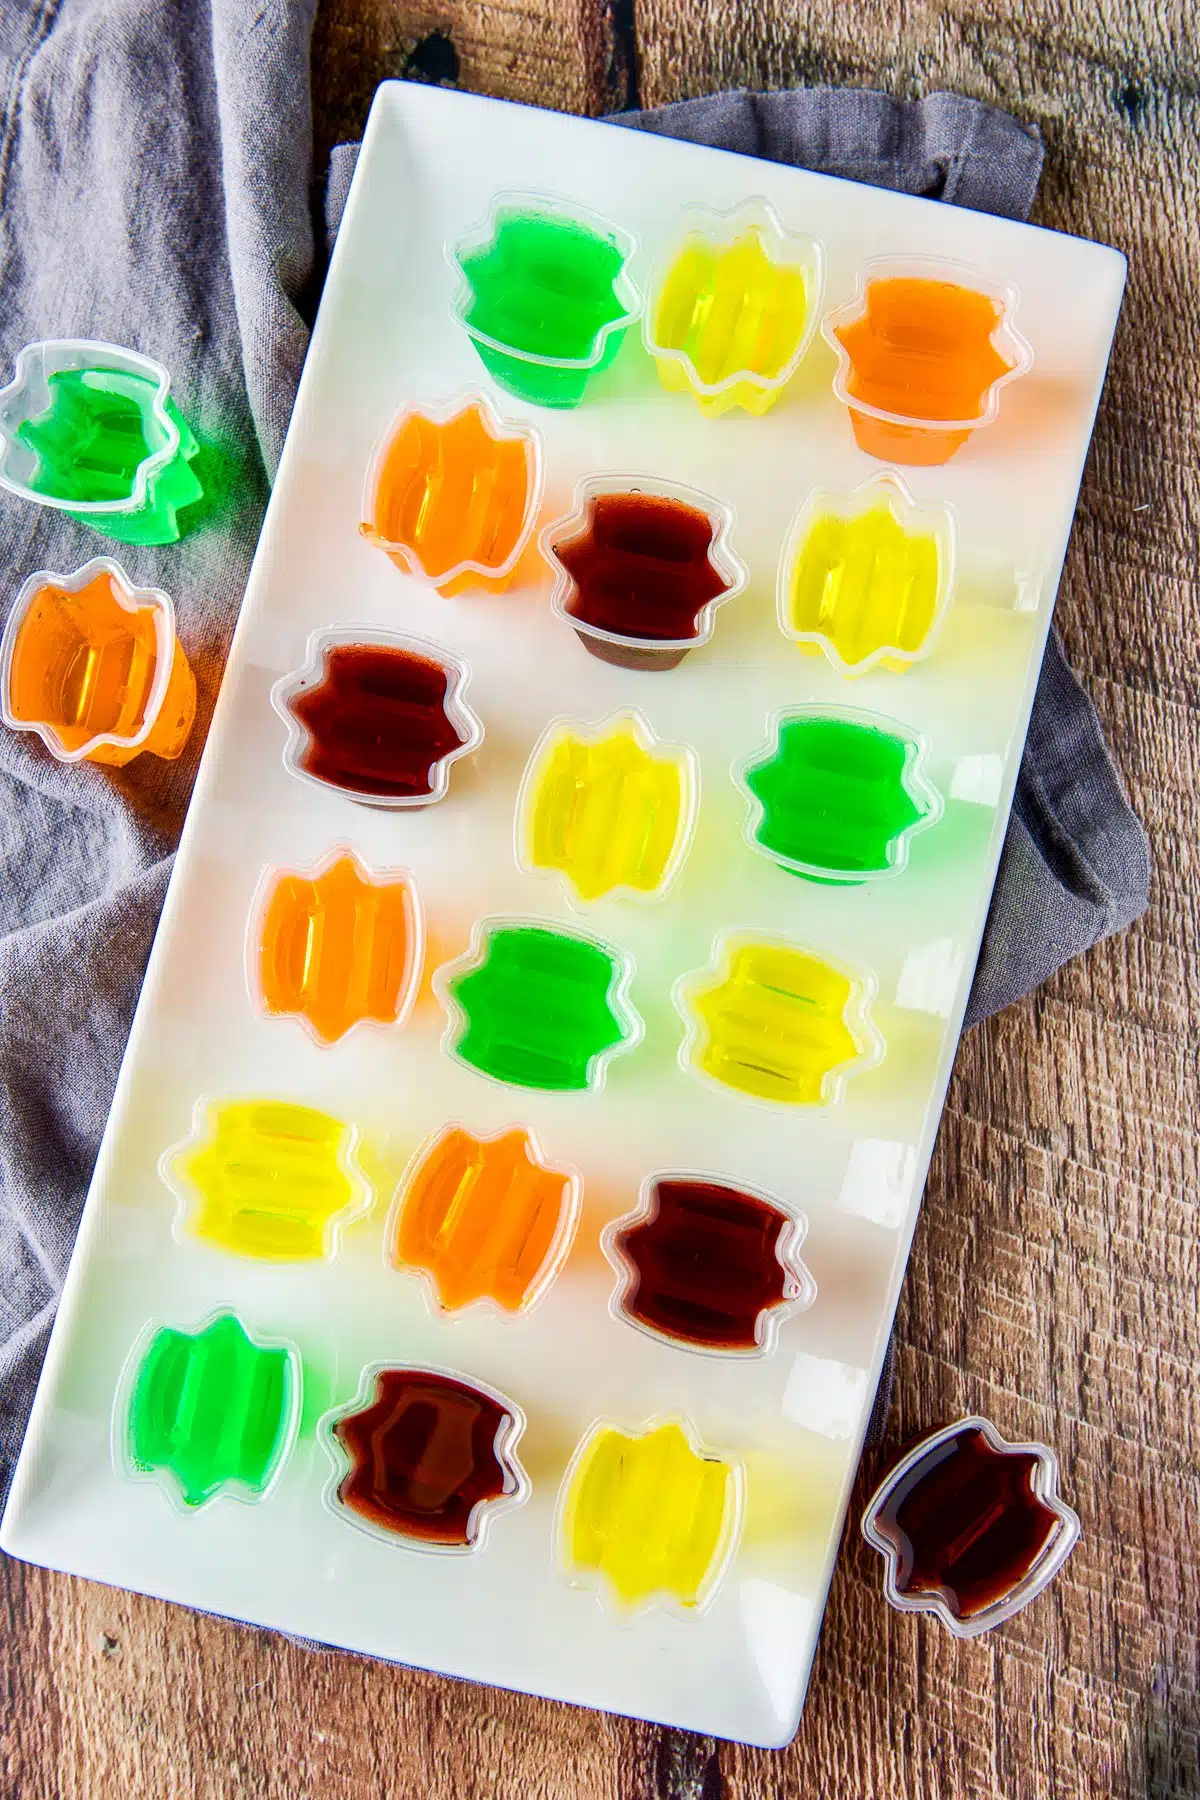 Overhead view of the platter of colored jello in cups